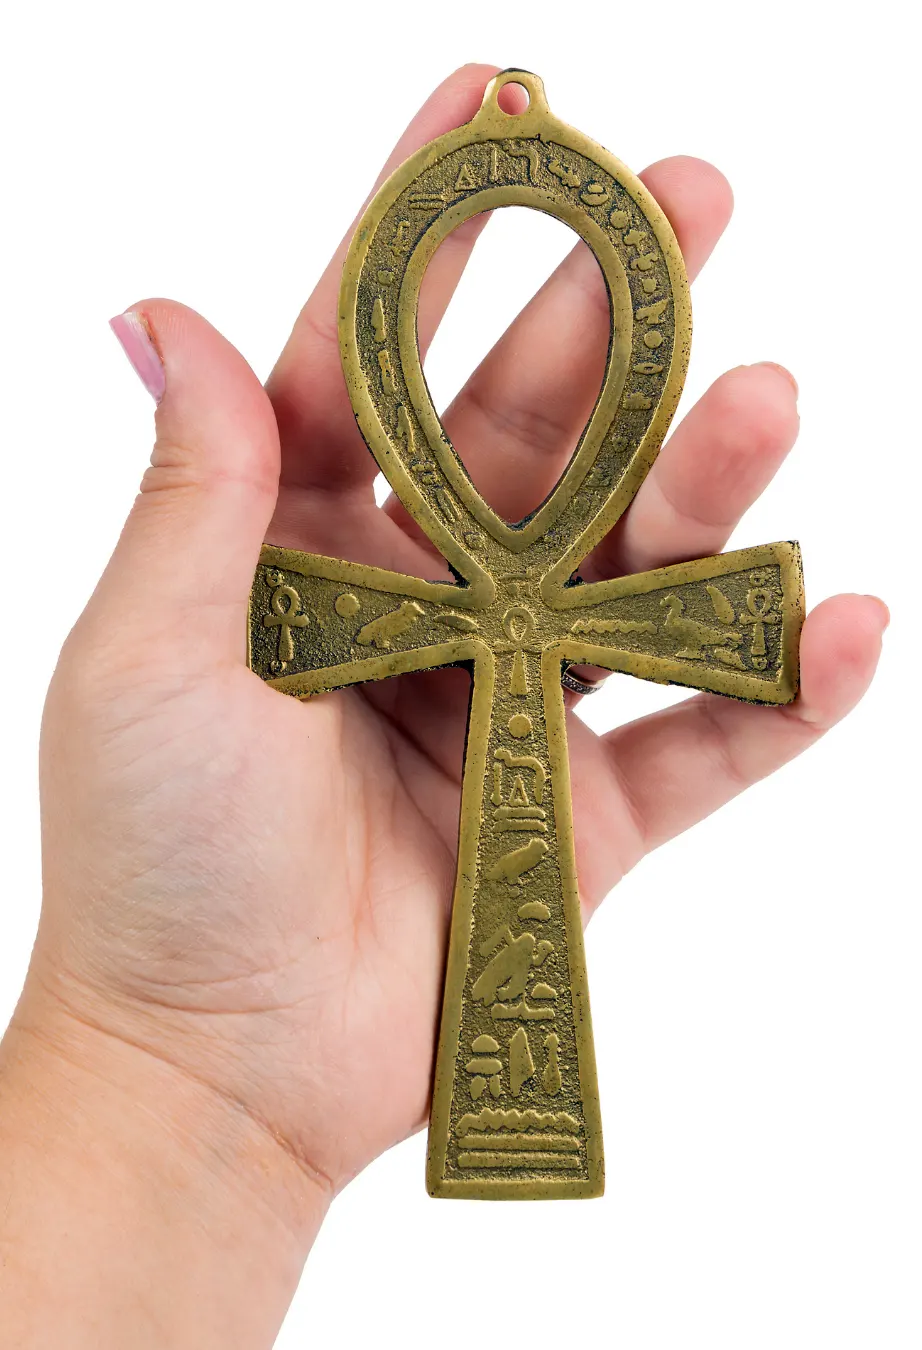 Woman's hand holding egyptian symbol of life Ankh